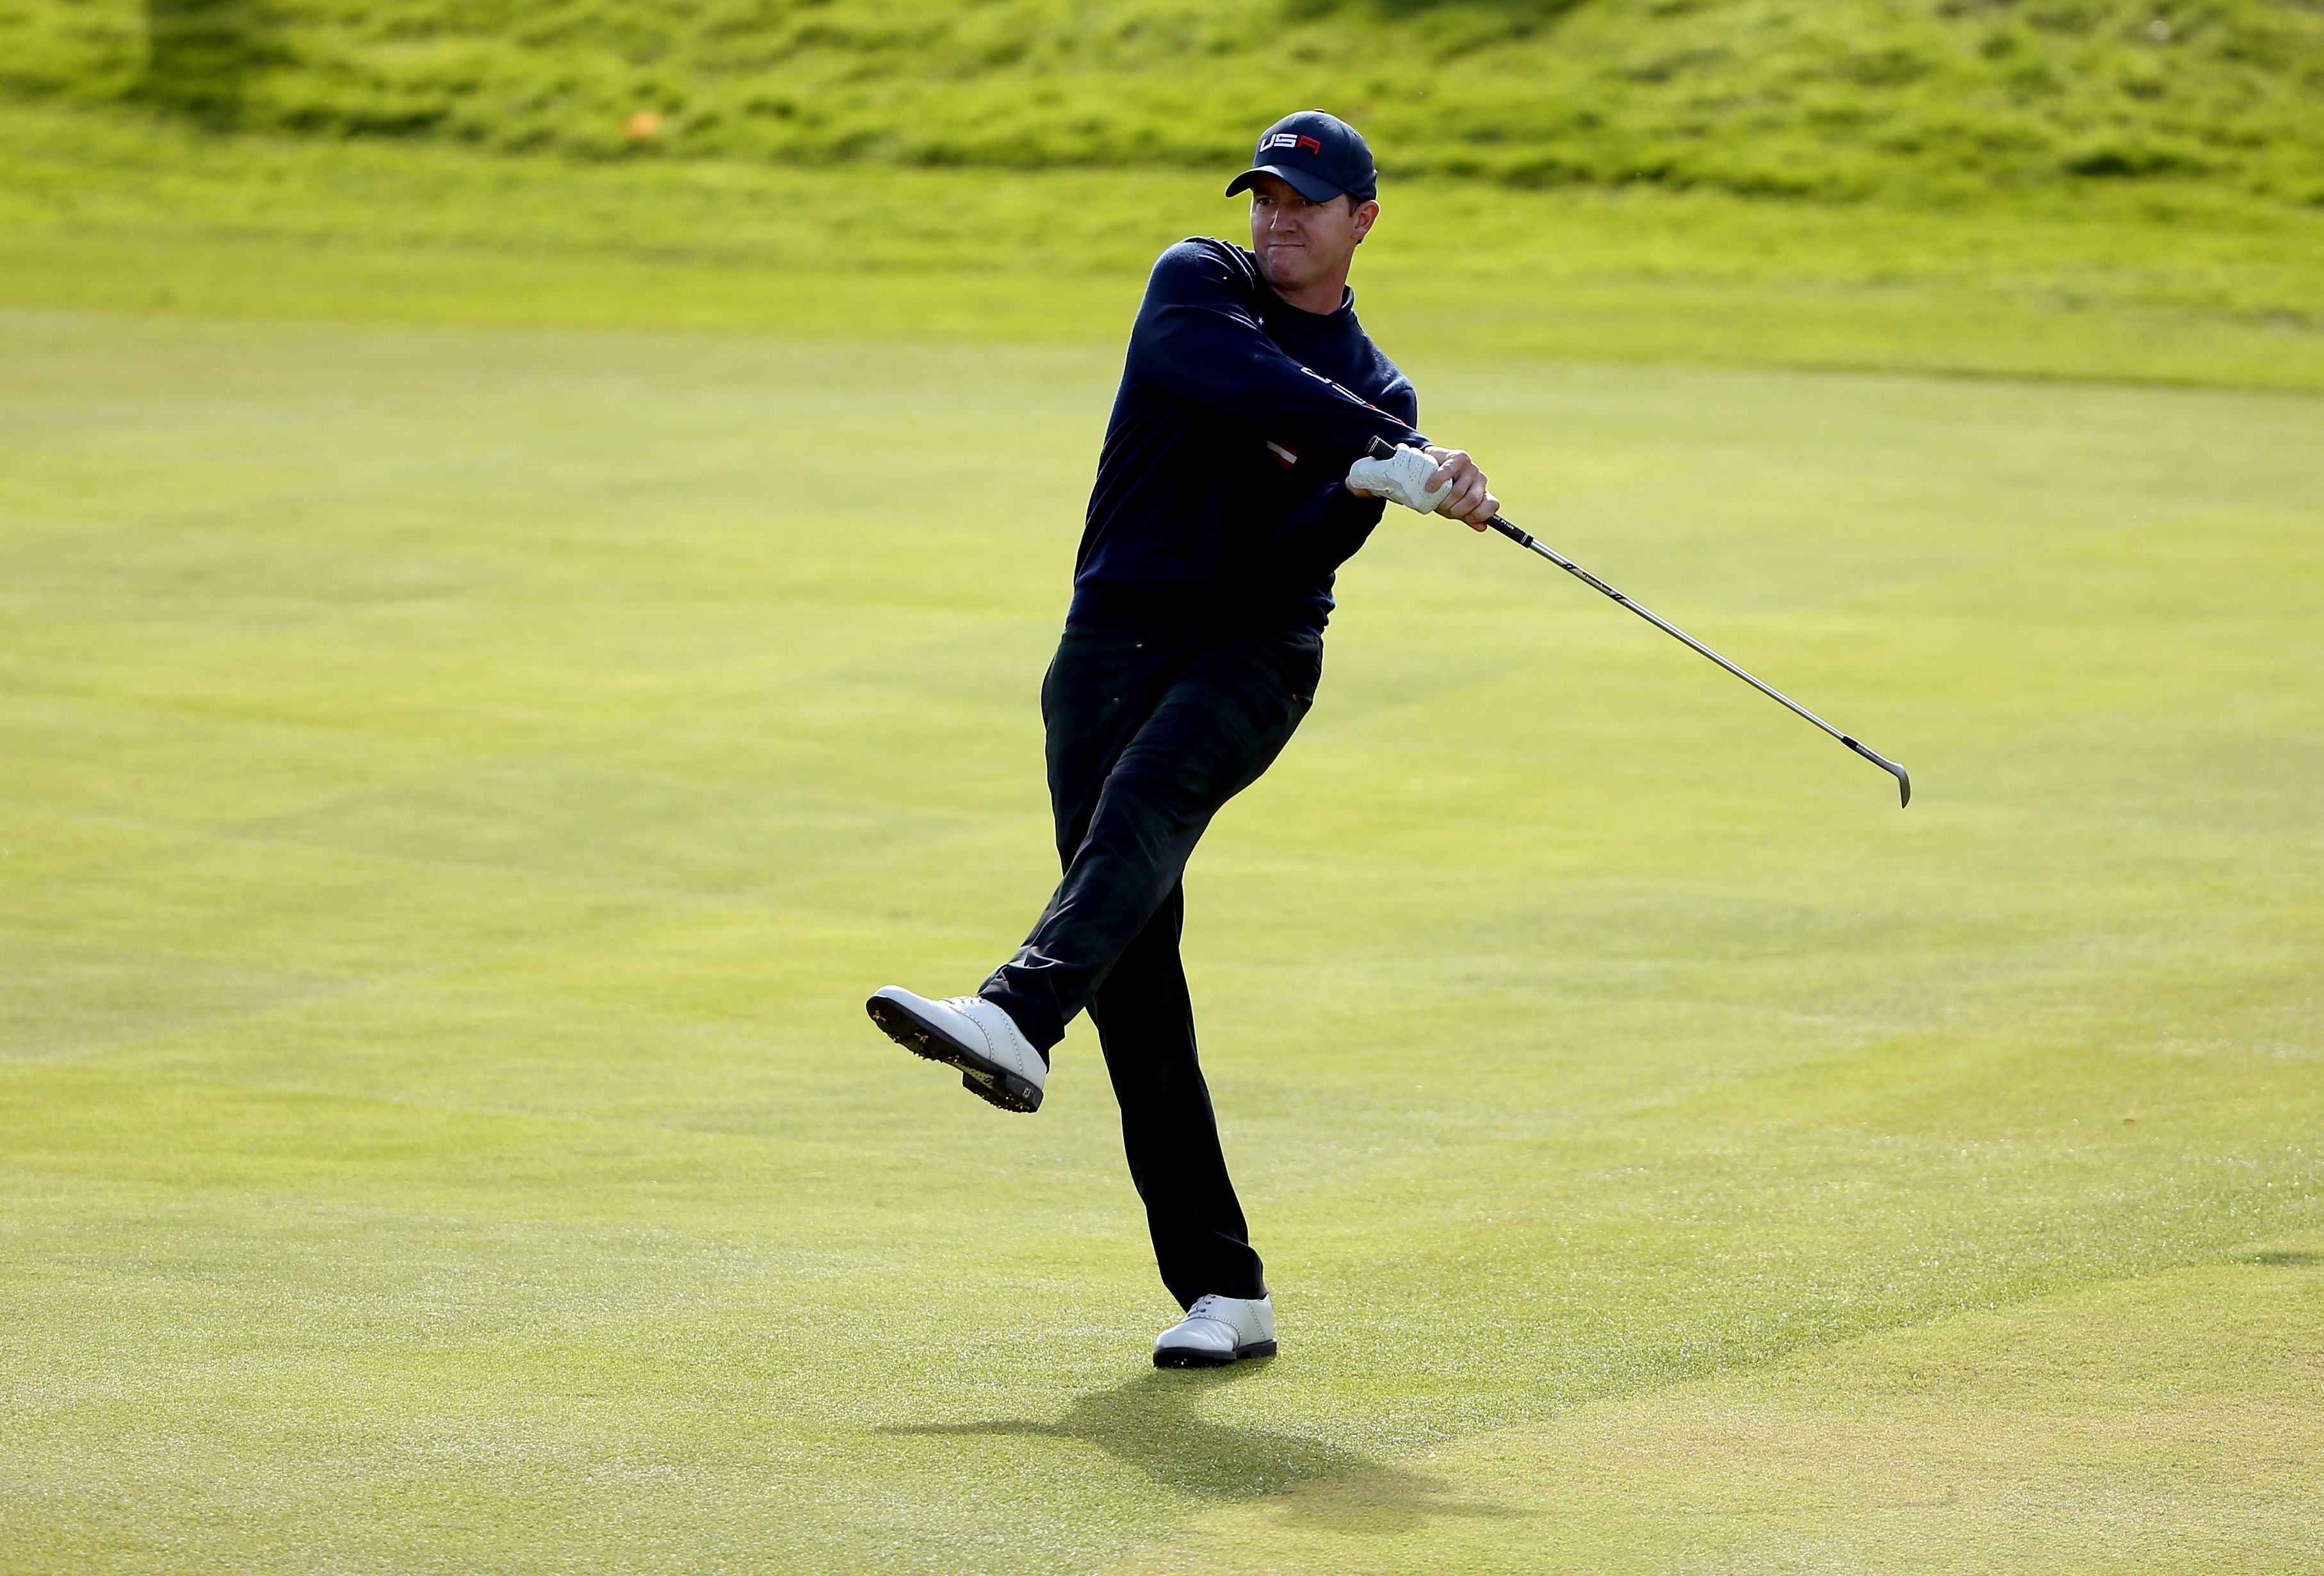 Jimmy Walker at the 2014 Ryder Cup (Getty Images)